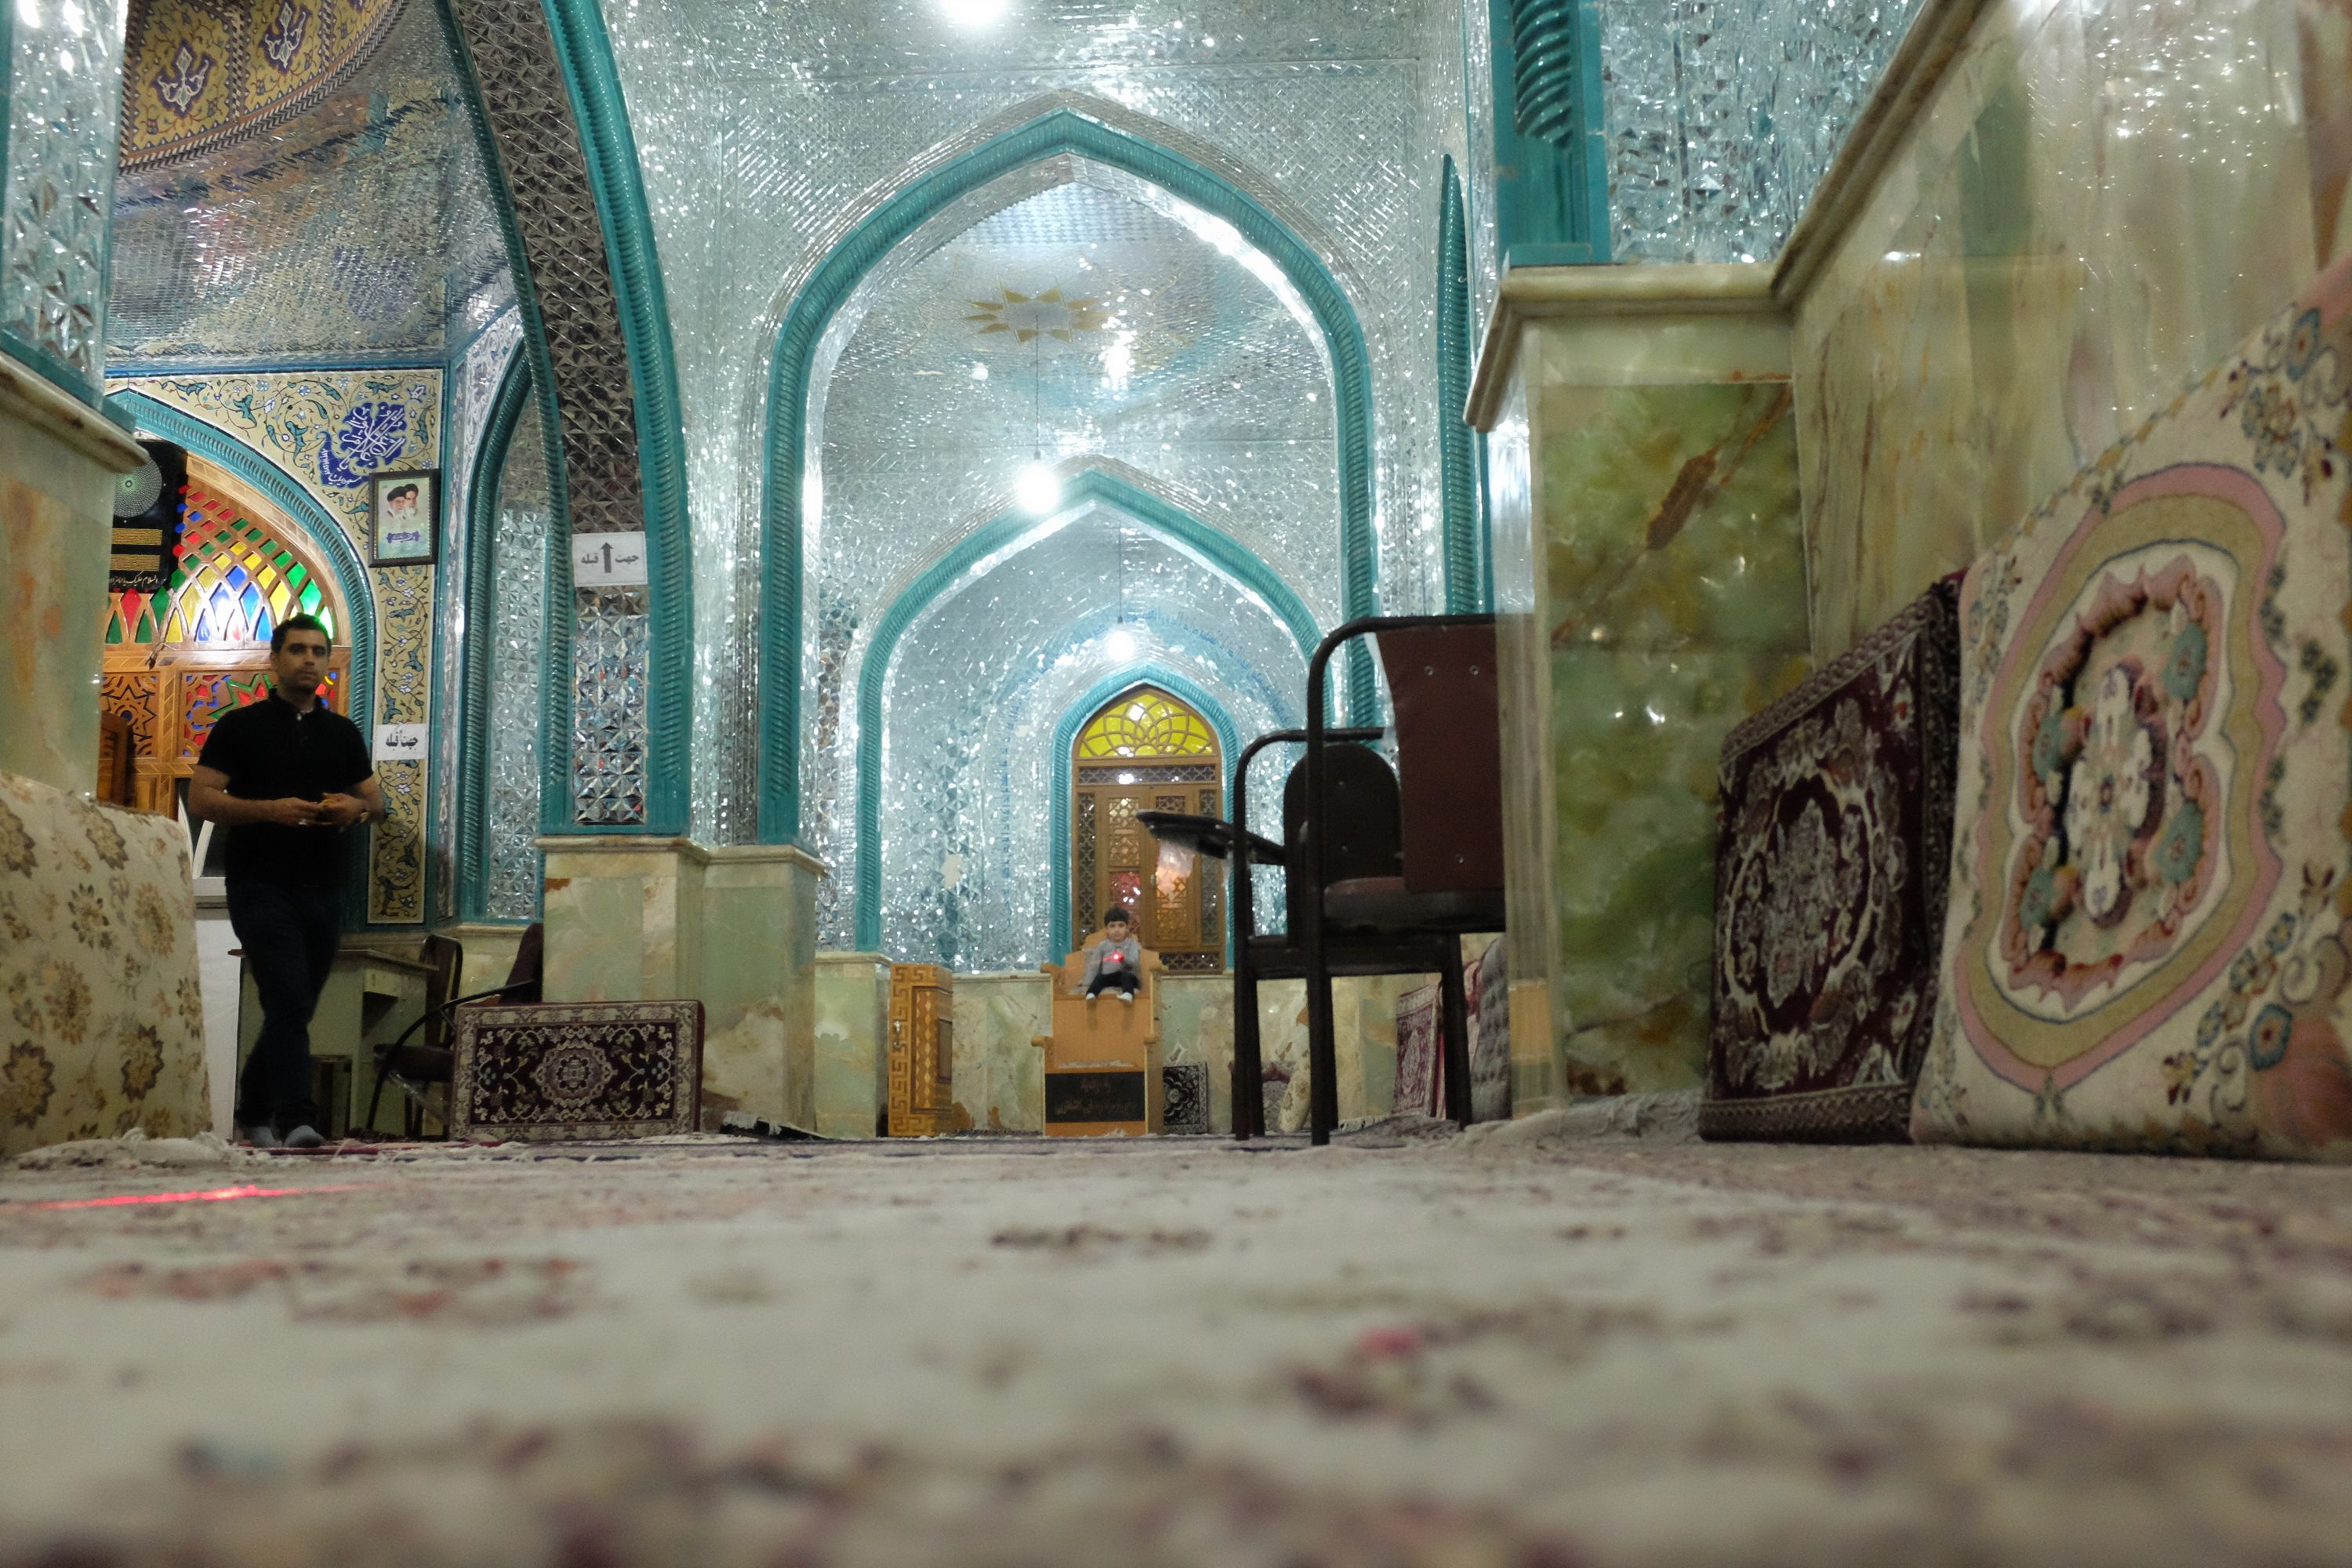 Seen from ground level, a small boy sits on a tall chair and plays with a laser pointer in a shrine whose ceilings are decorated entirely with mirrored tiles.